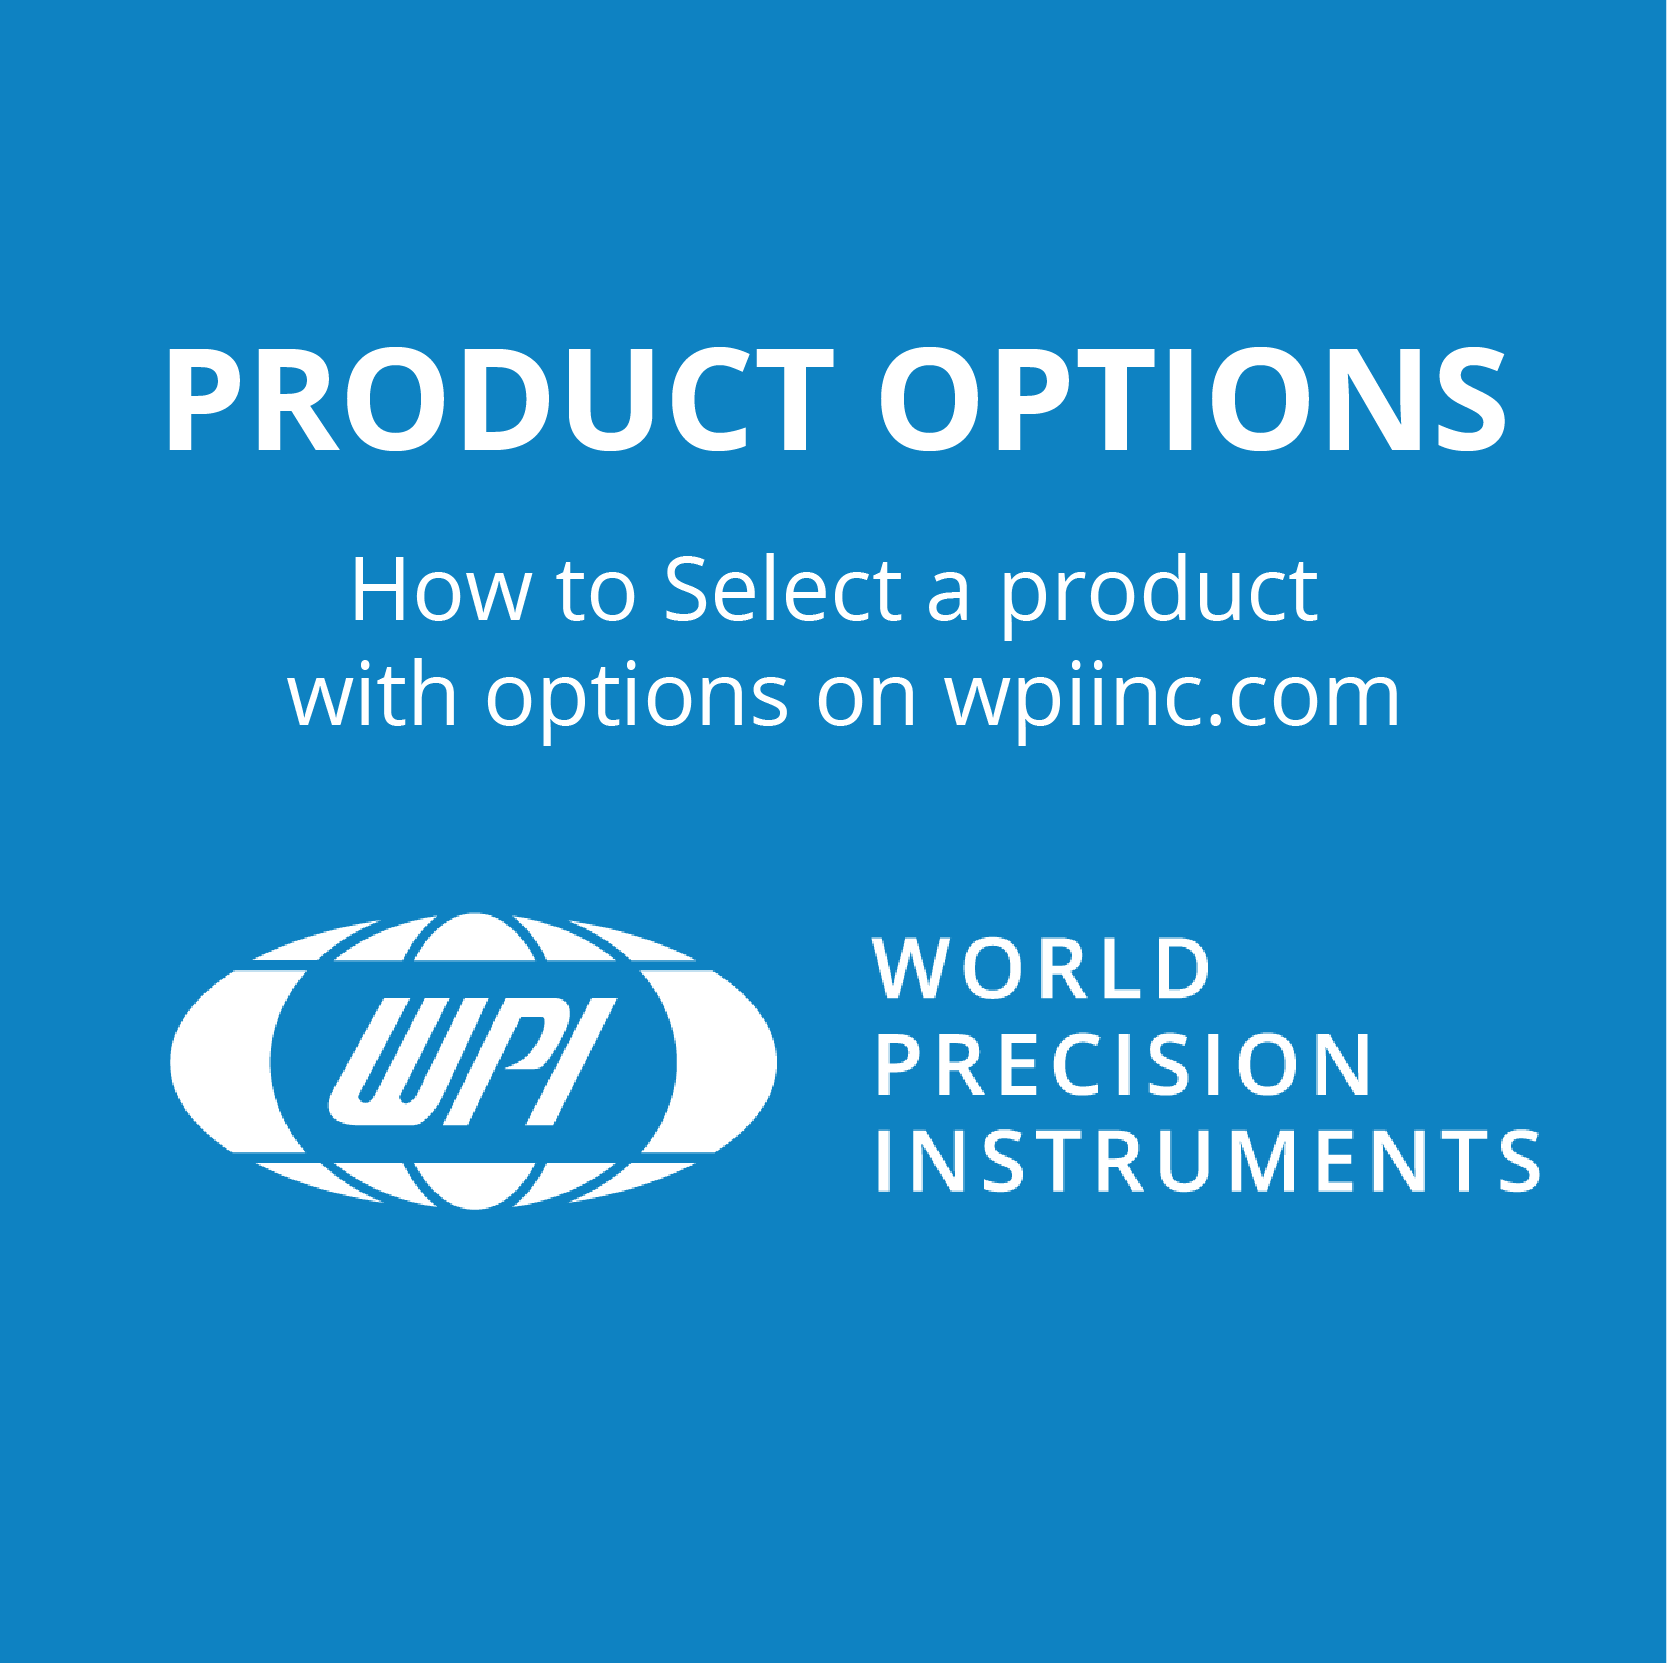 Selecting a product option